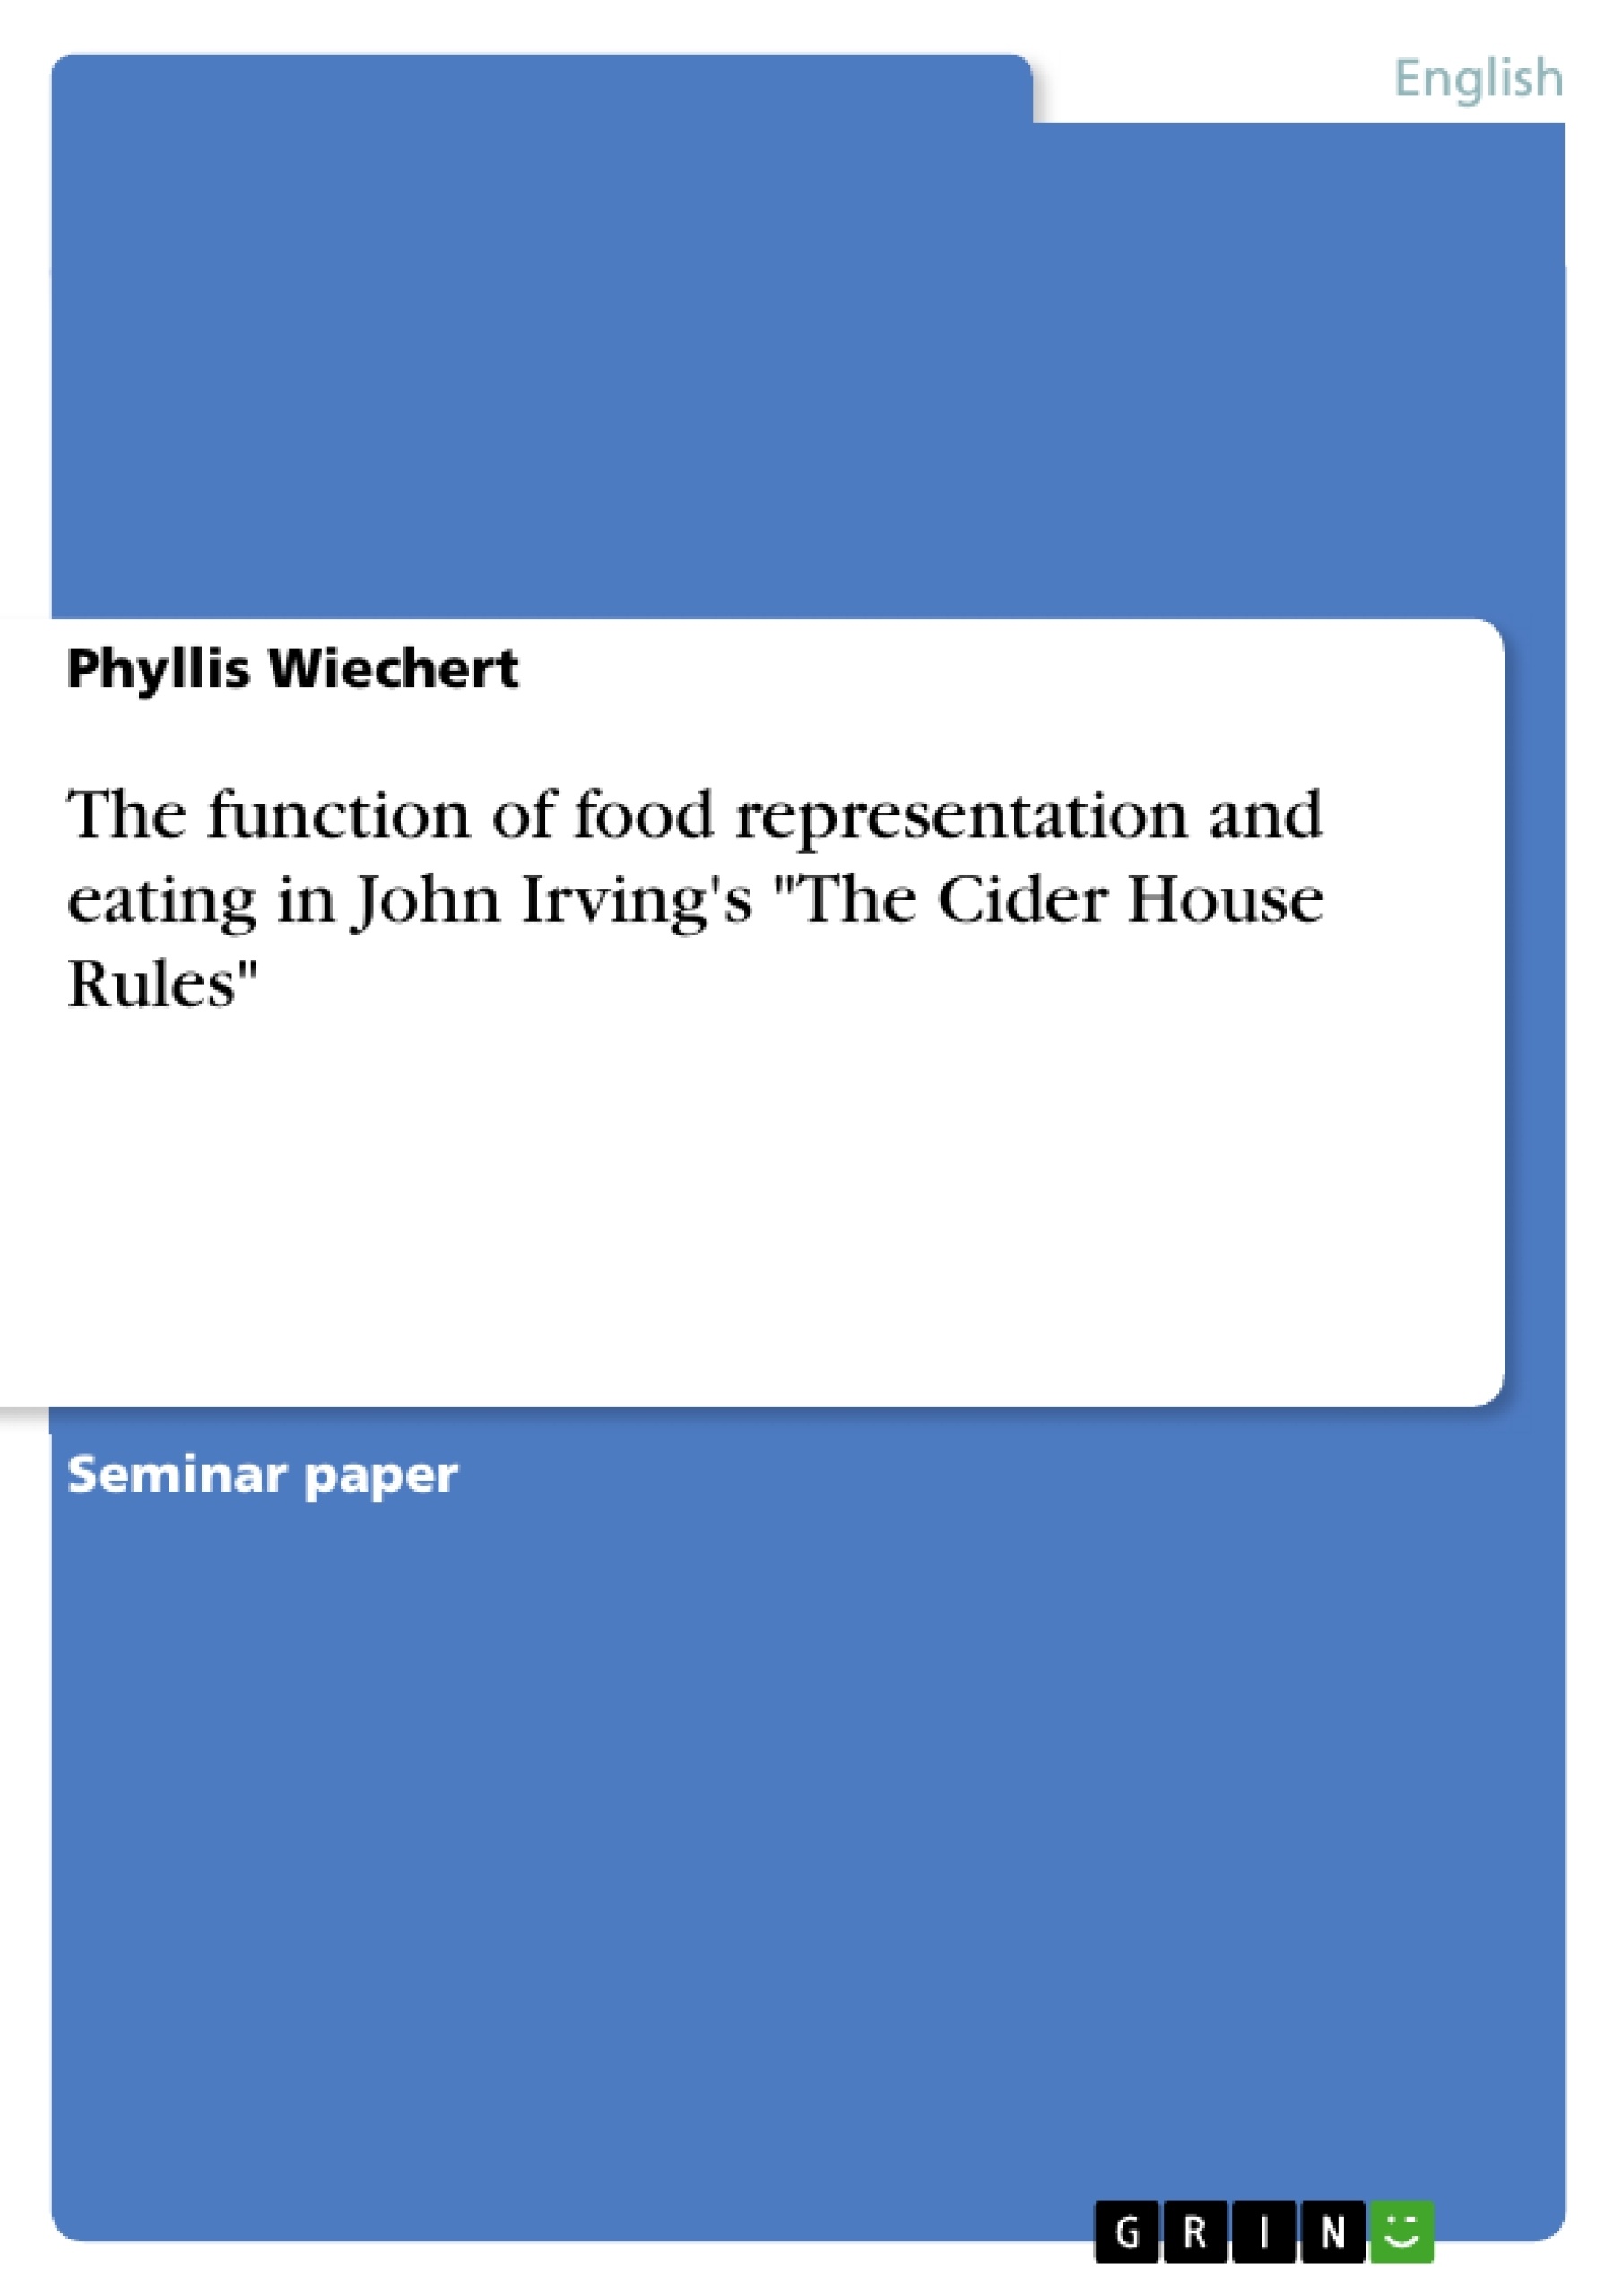 Title: The function of food representation and eating in John Irving's "The Cider House Rules"